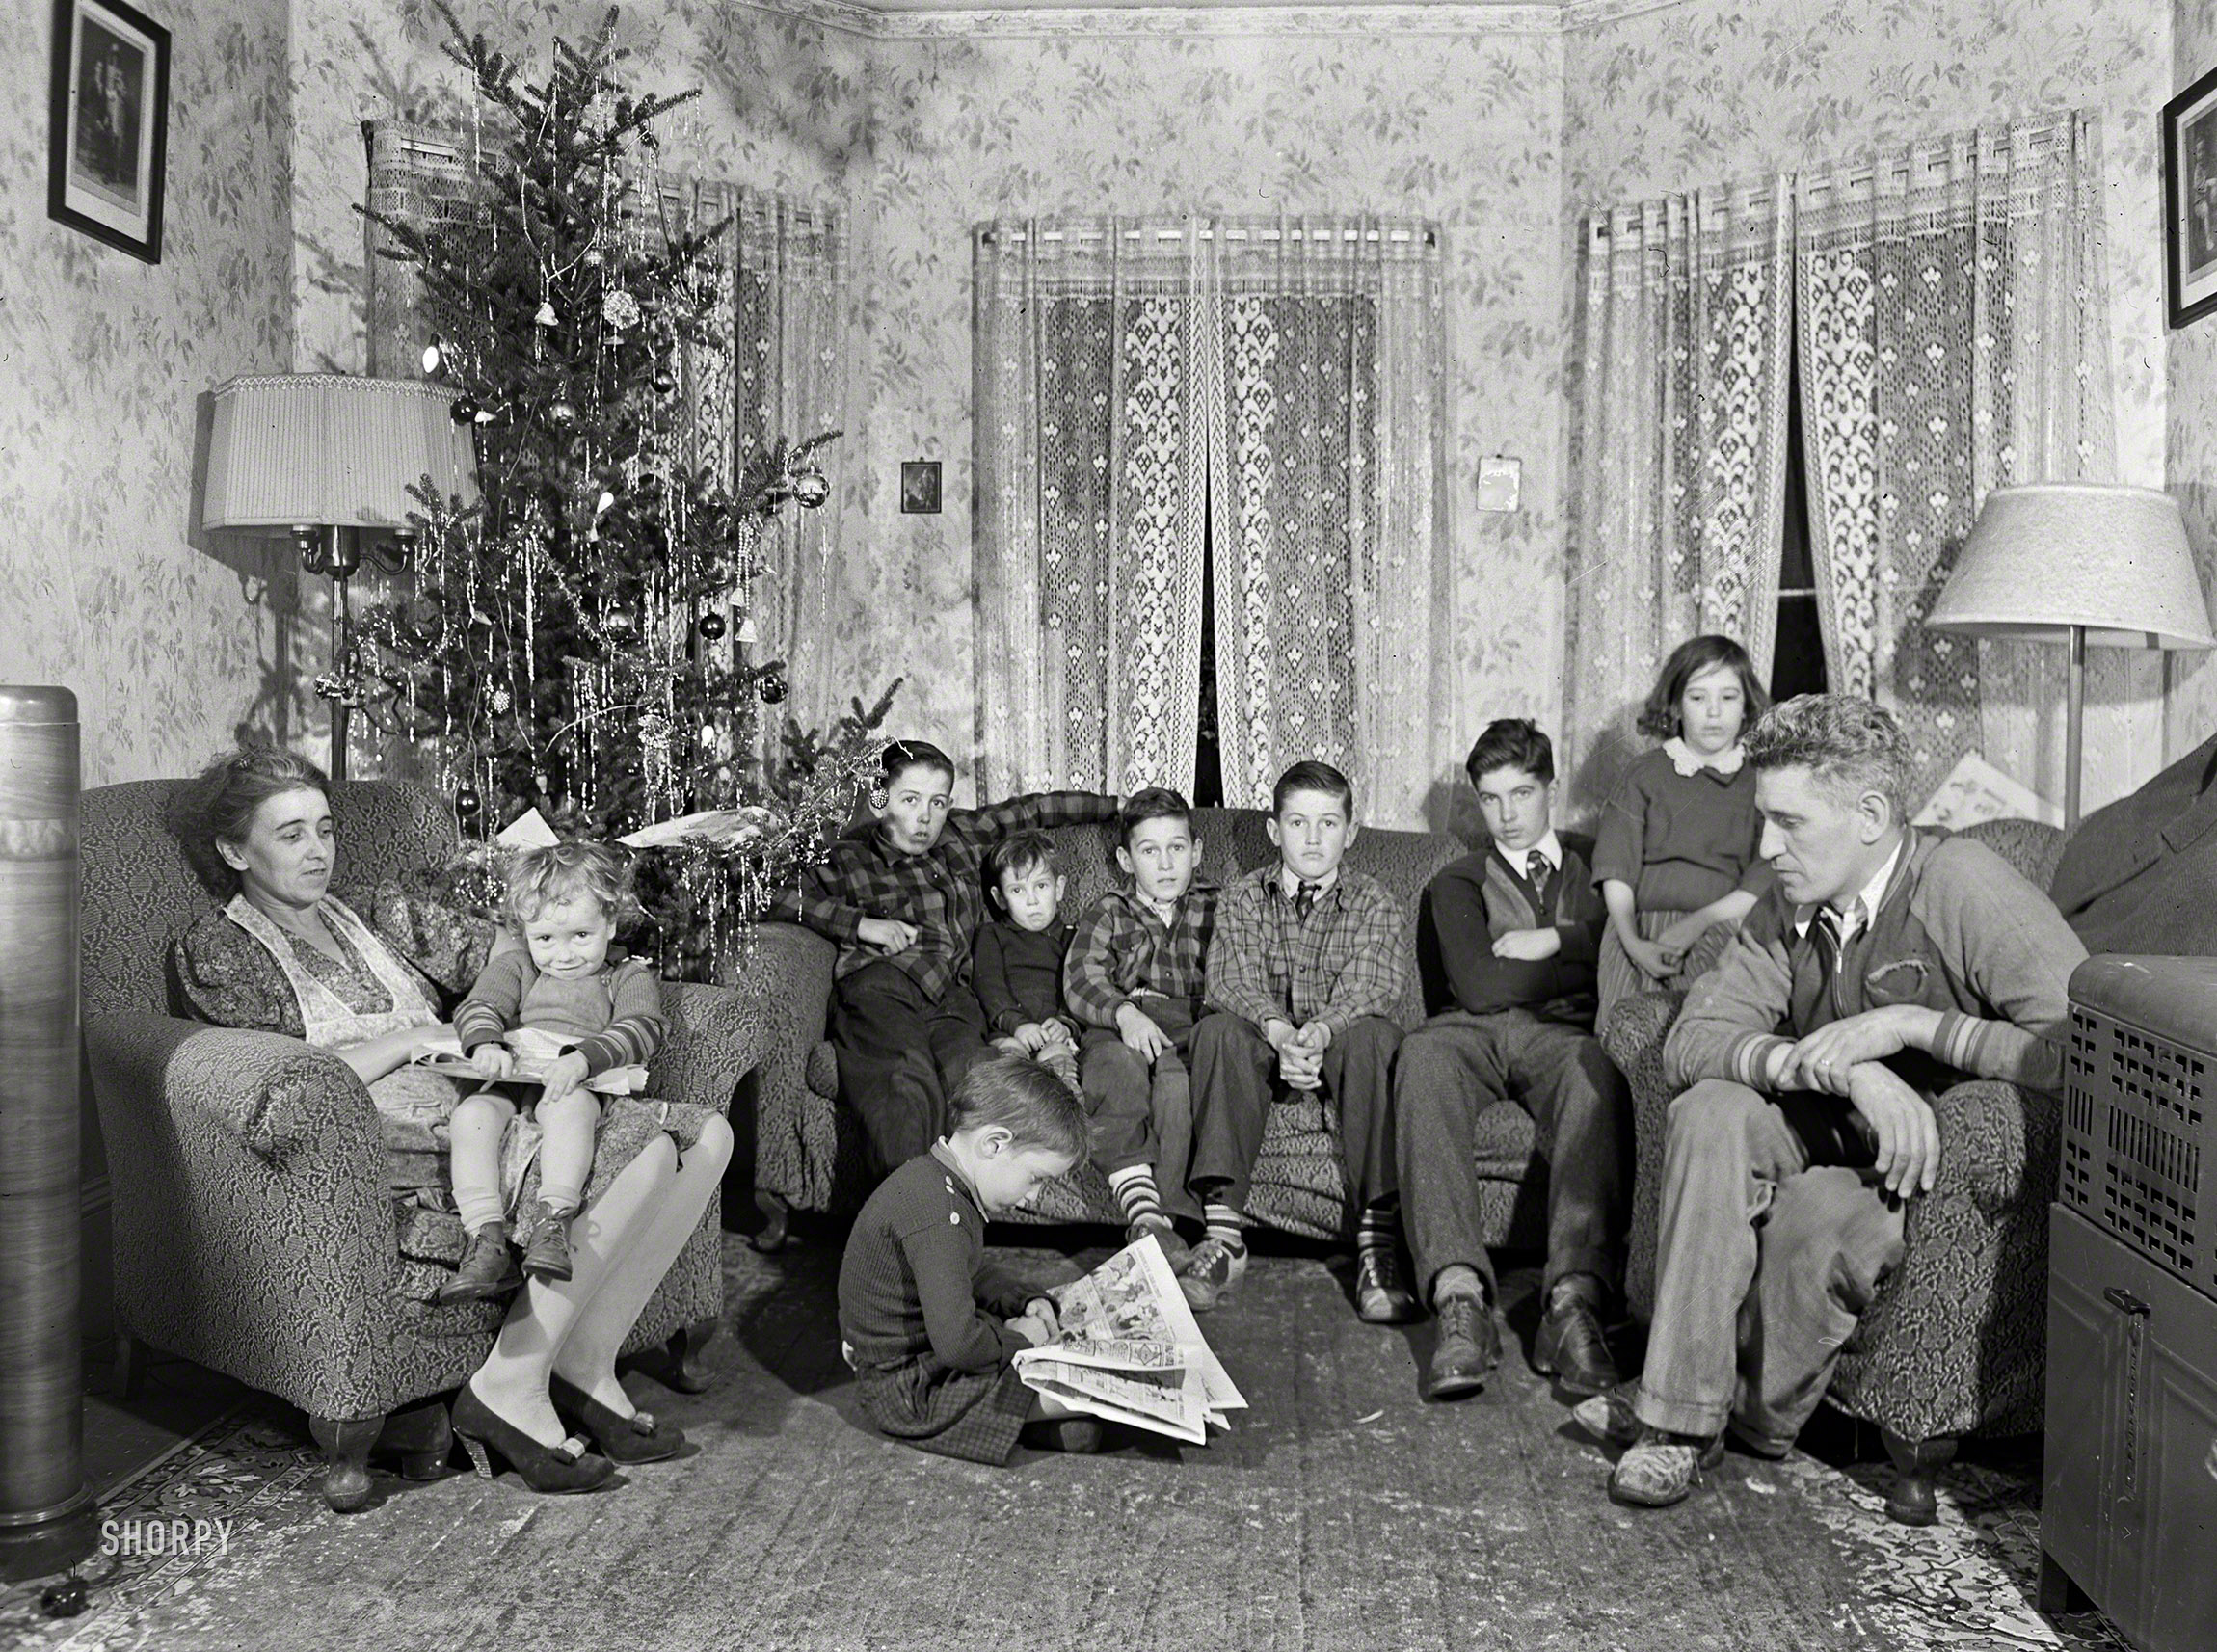 December 1940. "The family of John Kelly, who works in the Navy yard in South Boston. Their present tenement in Quincy is completely inadequate. They have been unable to move because every real estate agent has turned him down, claiming there was no reason why they should rent to large families when there is such a great demand for decent houses by hundreds of incoming shipyard workers." Medium format negative by Jack Delano. View full size.